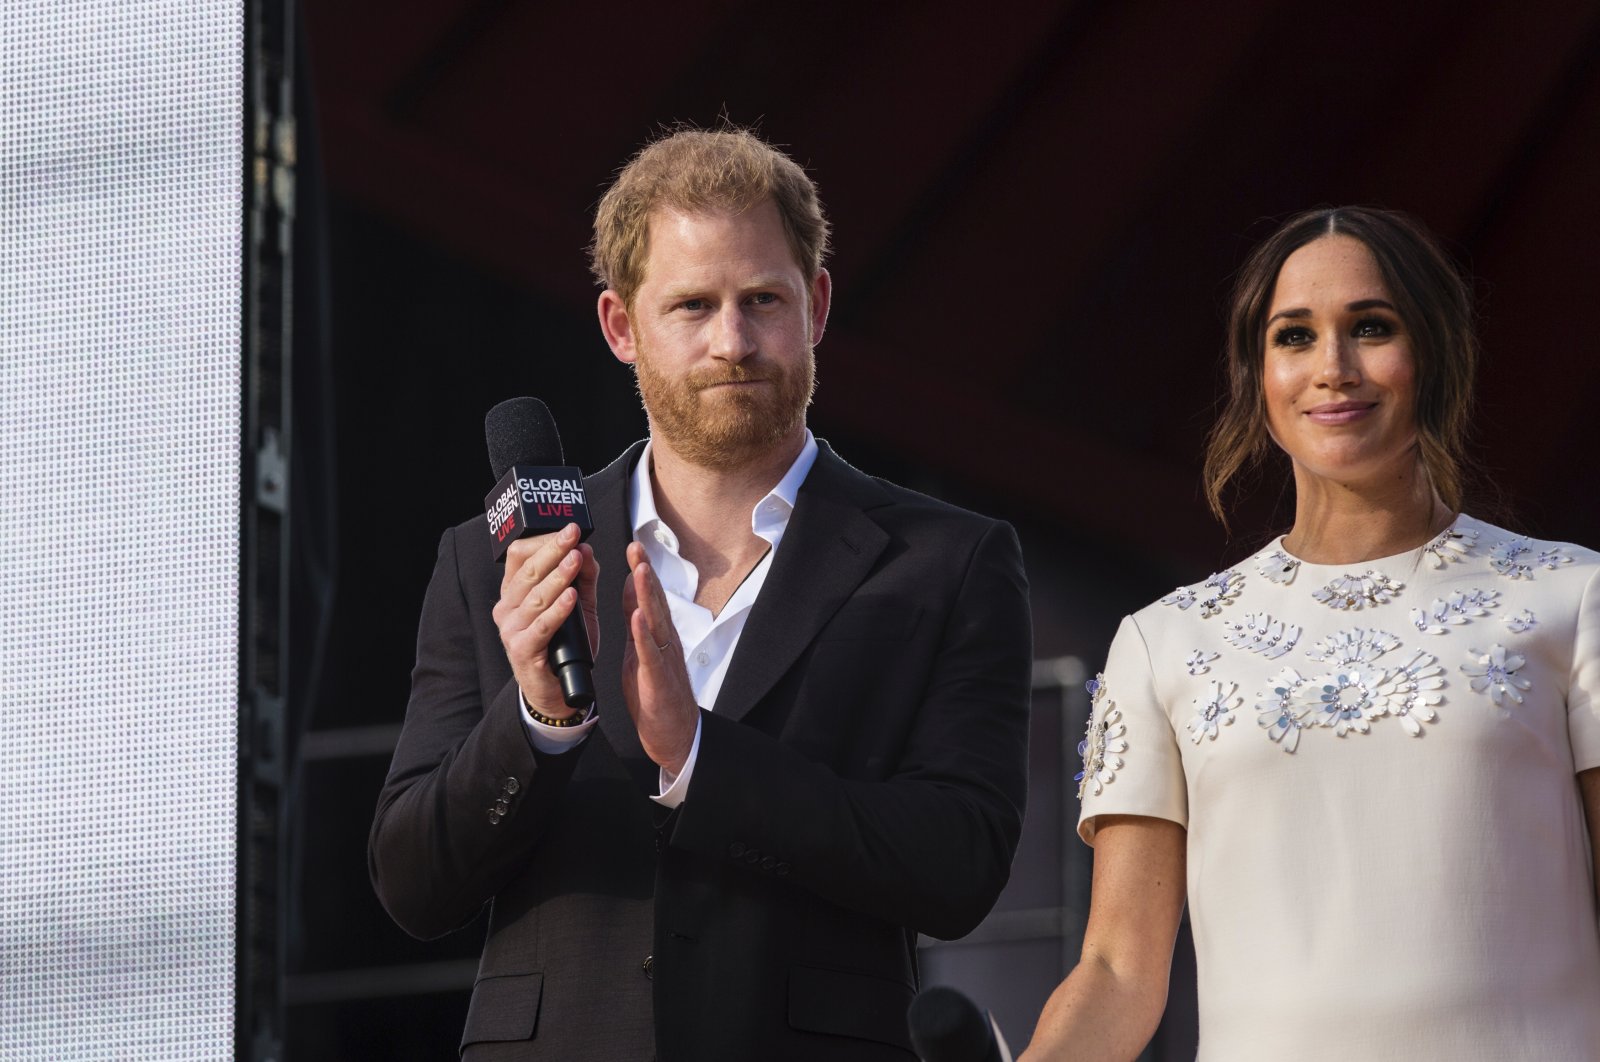 Prince Harry (L) and Meghan Markle speak during the Global Citizen Festival in New York, U.S., Sept. 25, 2021. (AP File Photo)